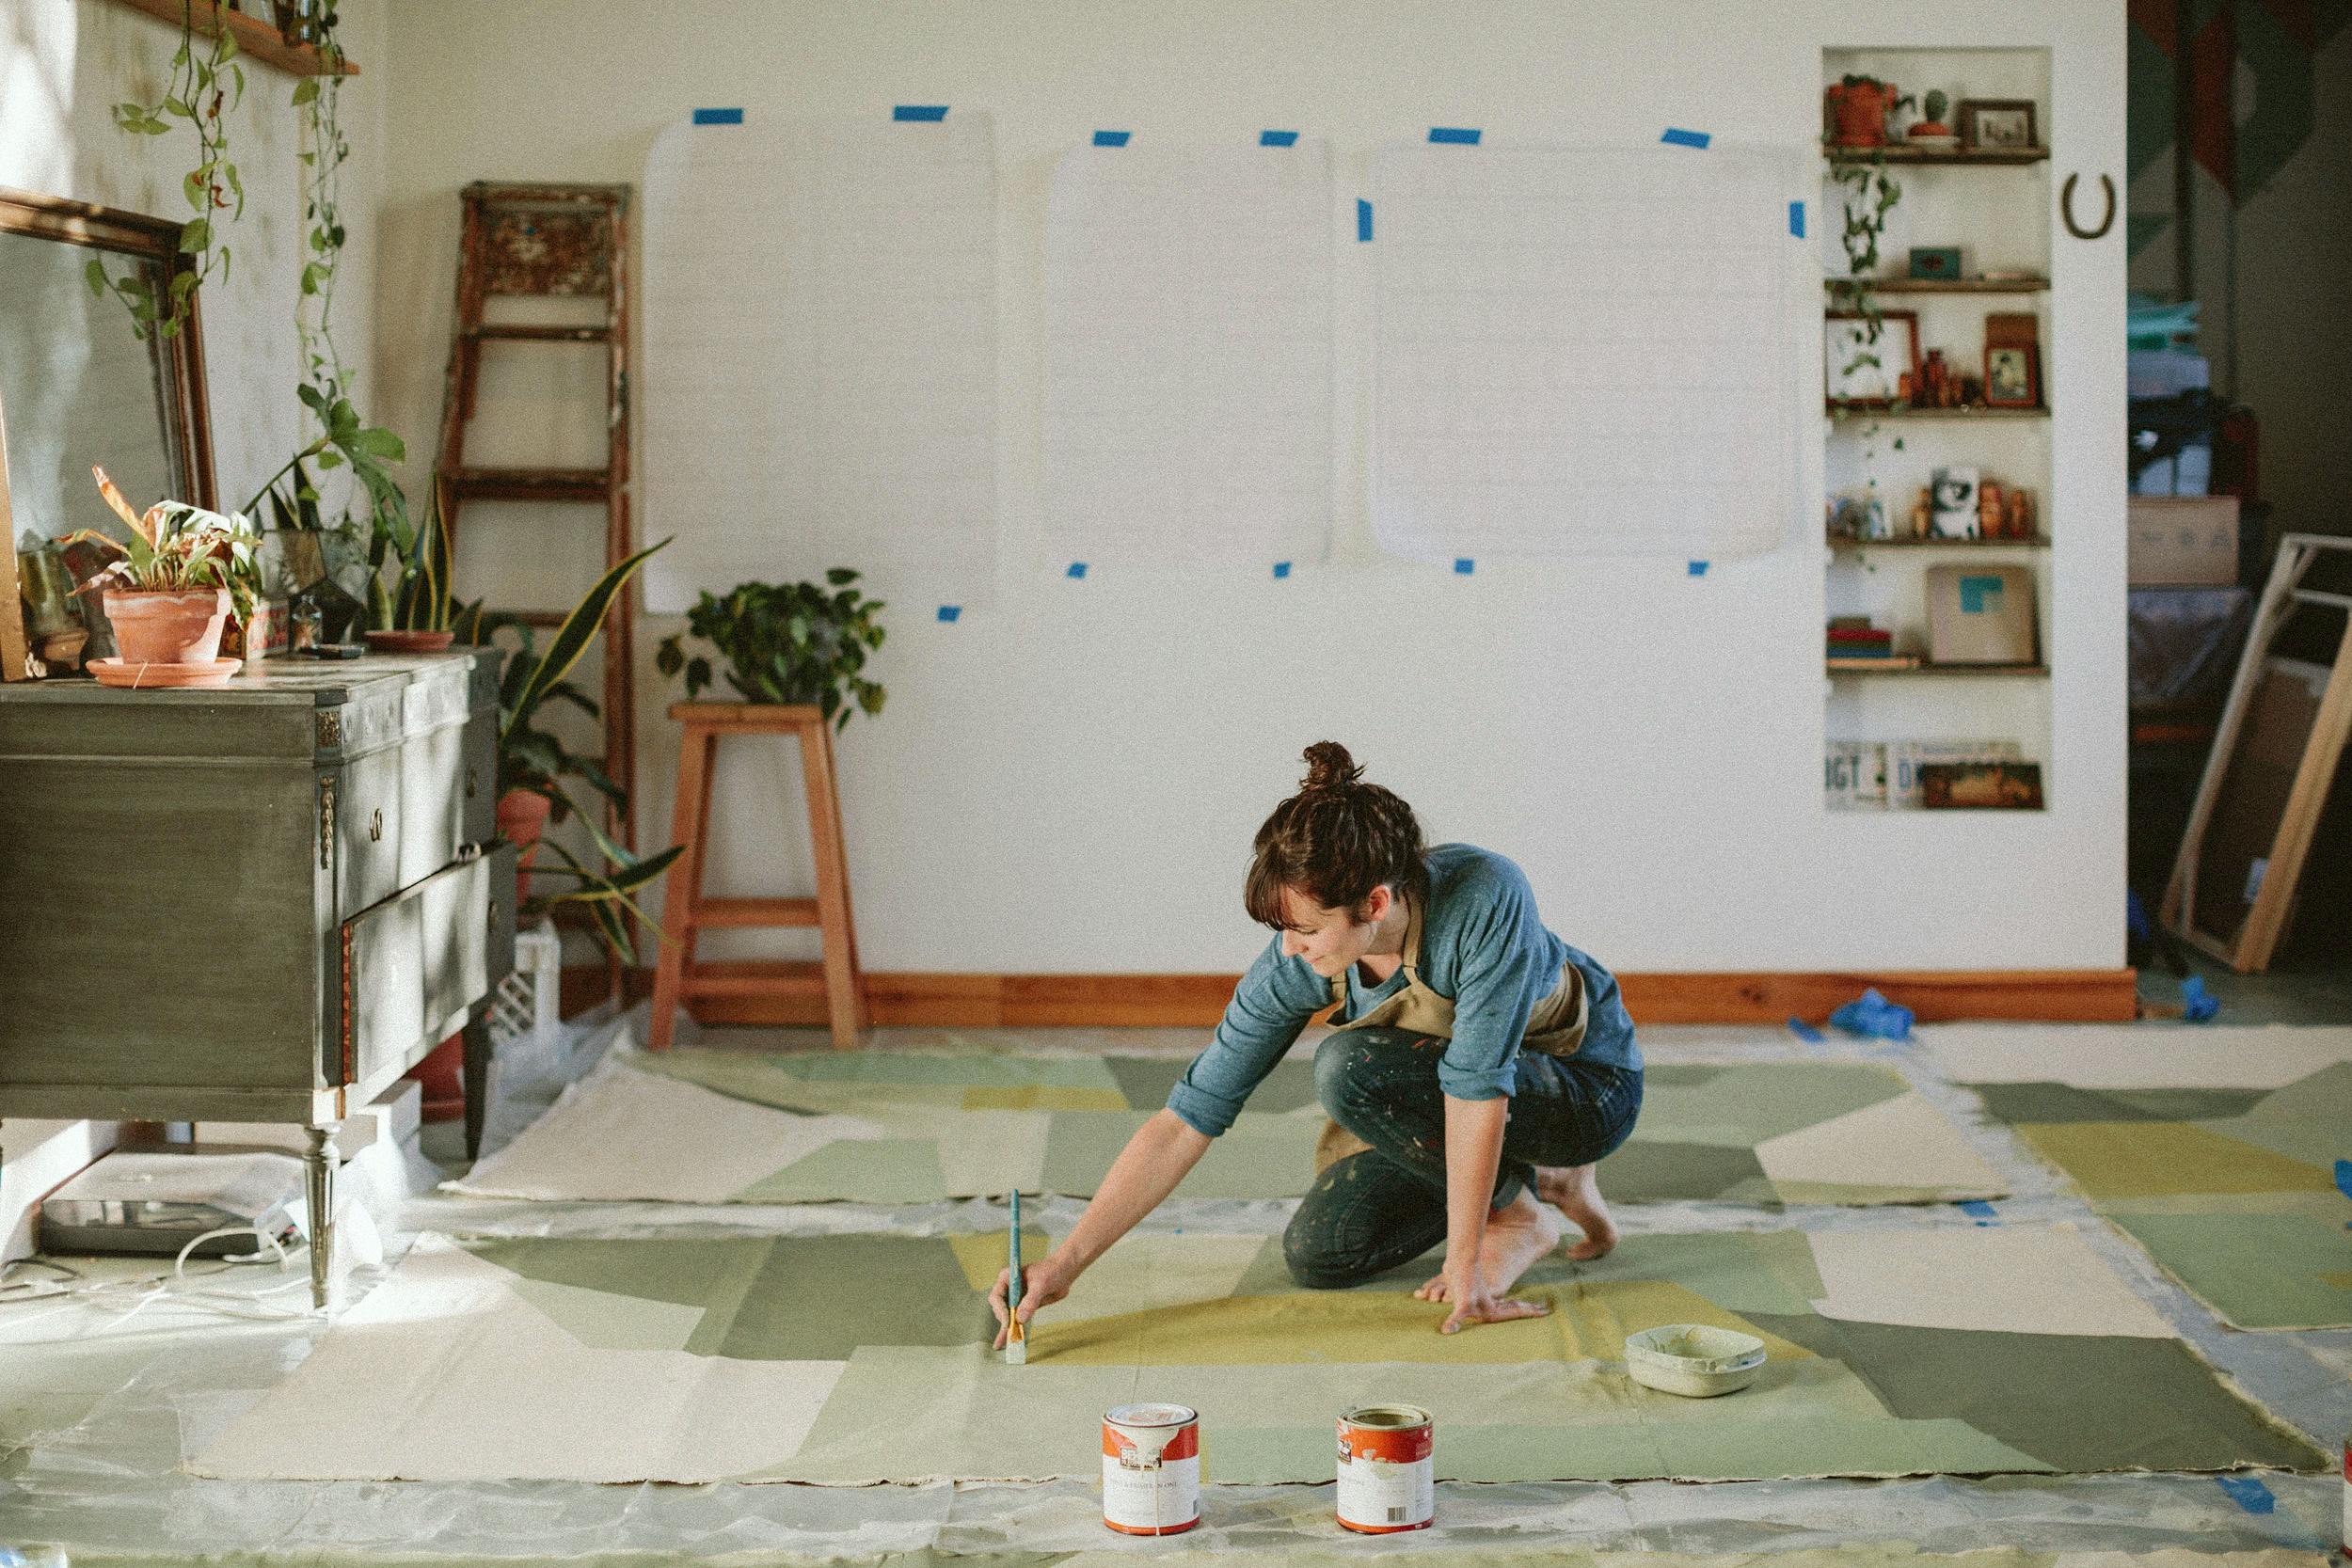 Artist Carla Weeks painting a large green work on canvas in her studio.